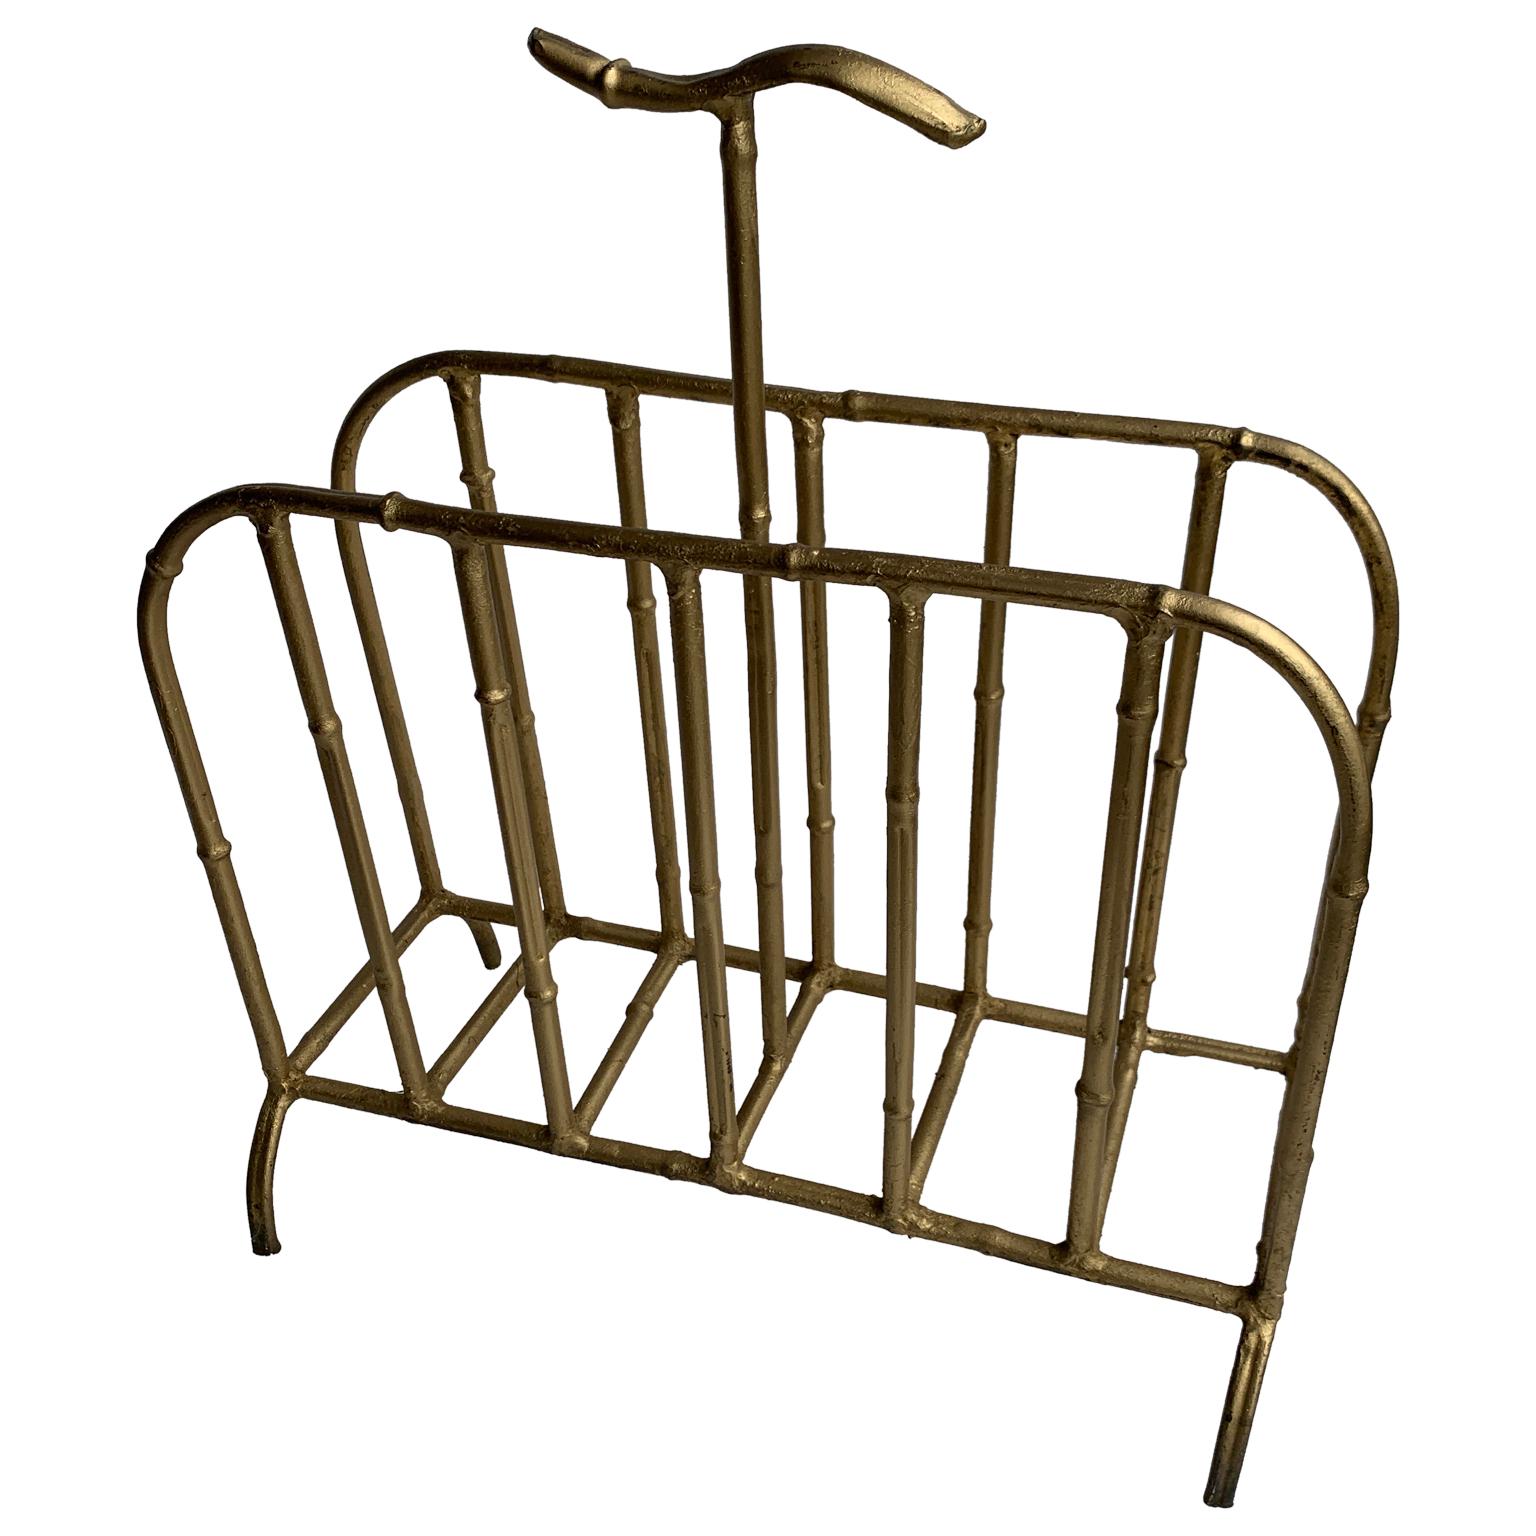 Faux-bamboo gilt-metal magazine or newspaper rack in great vintage condition.